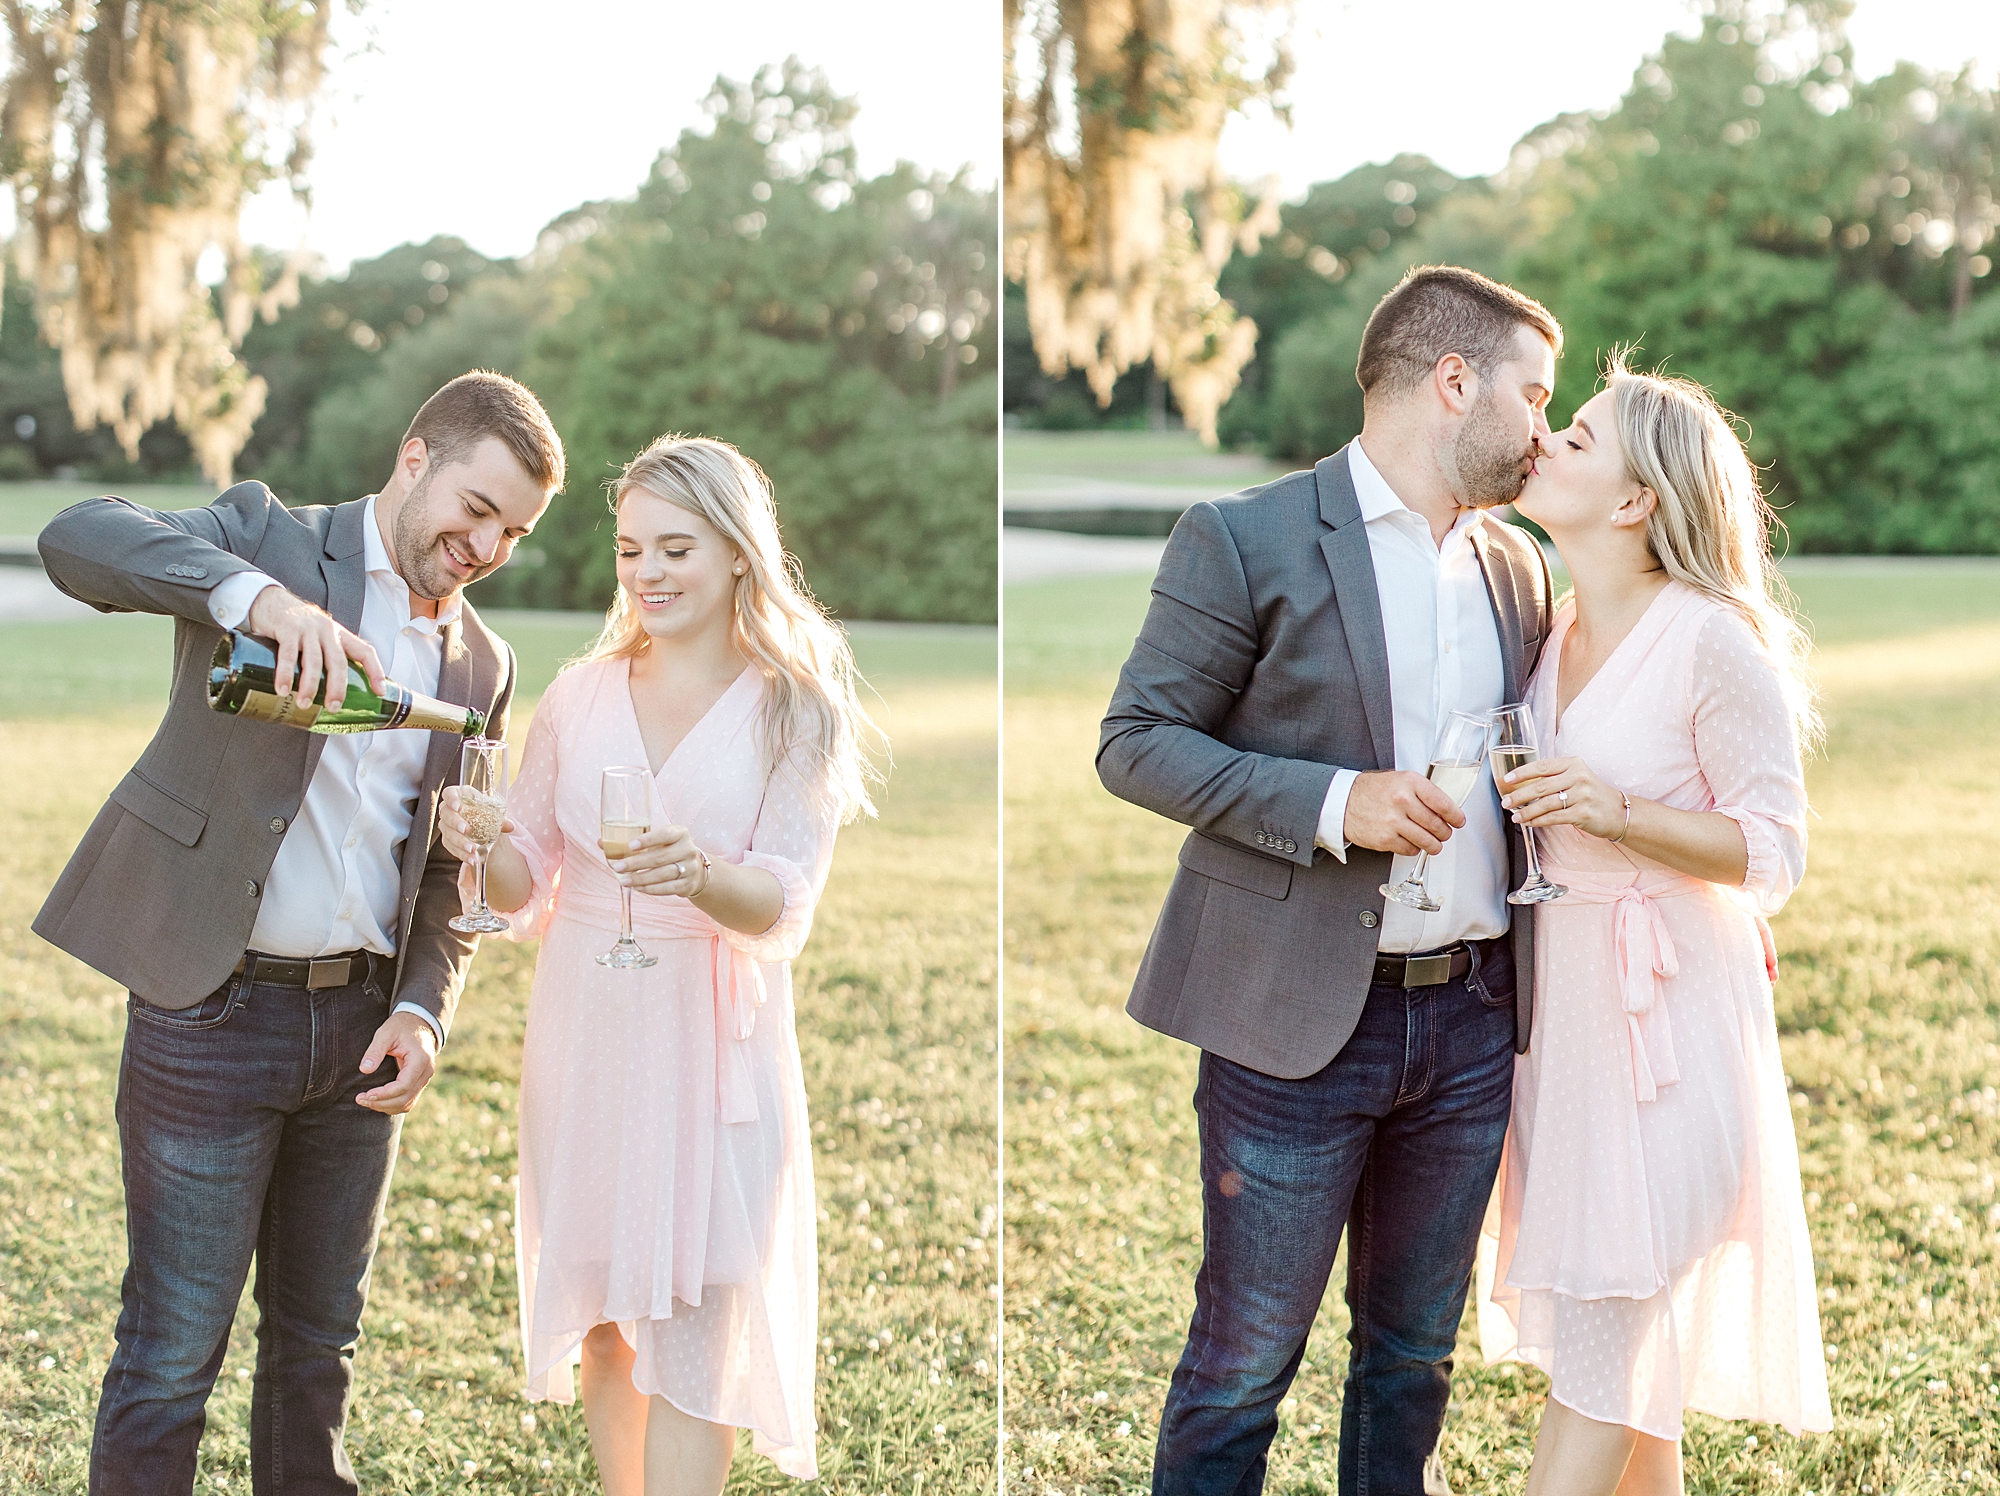 engaged couple pop champagne to celebrate during engagement photos